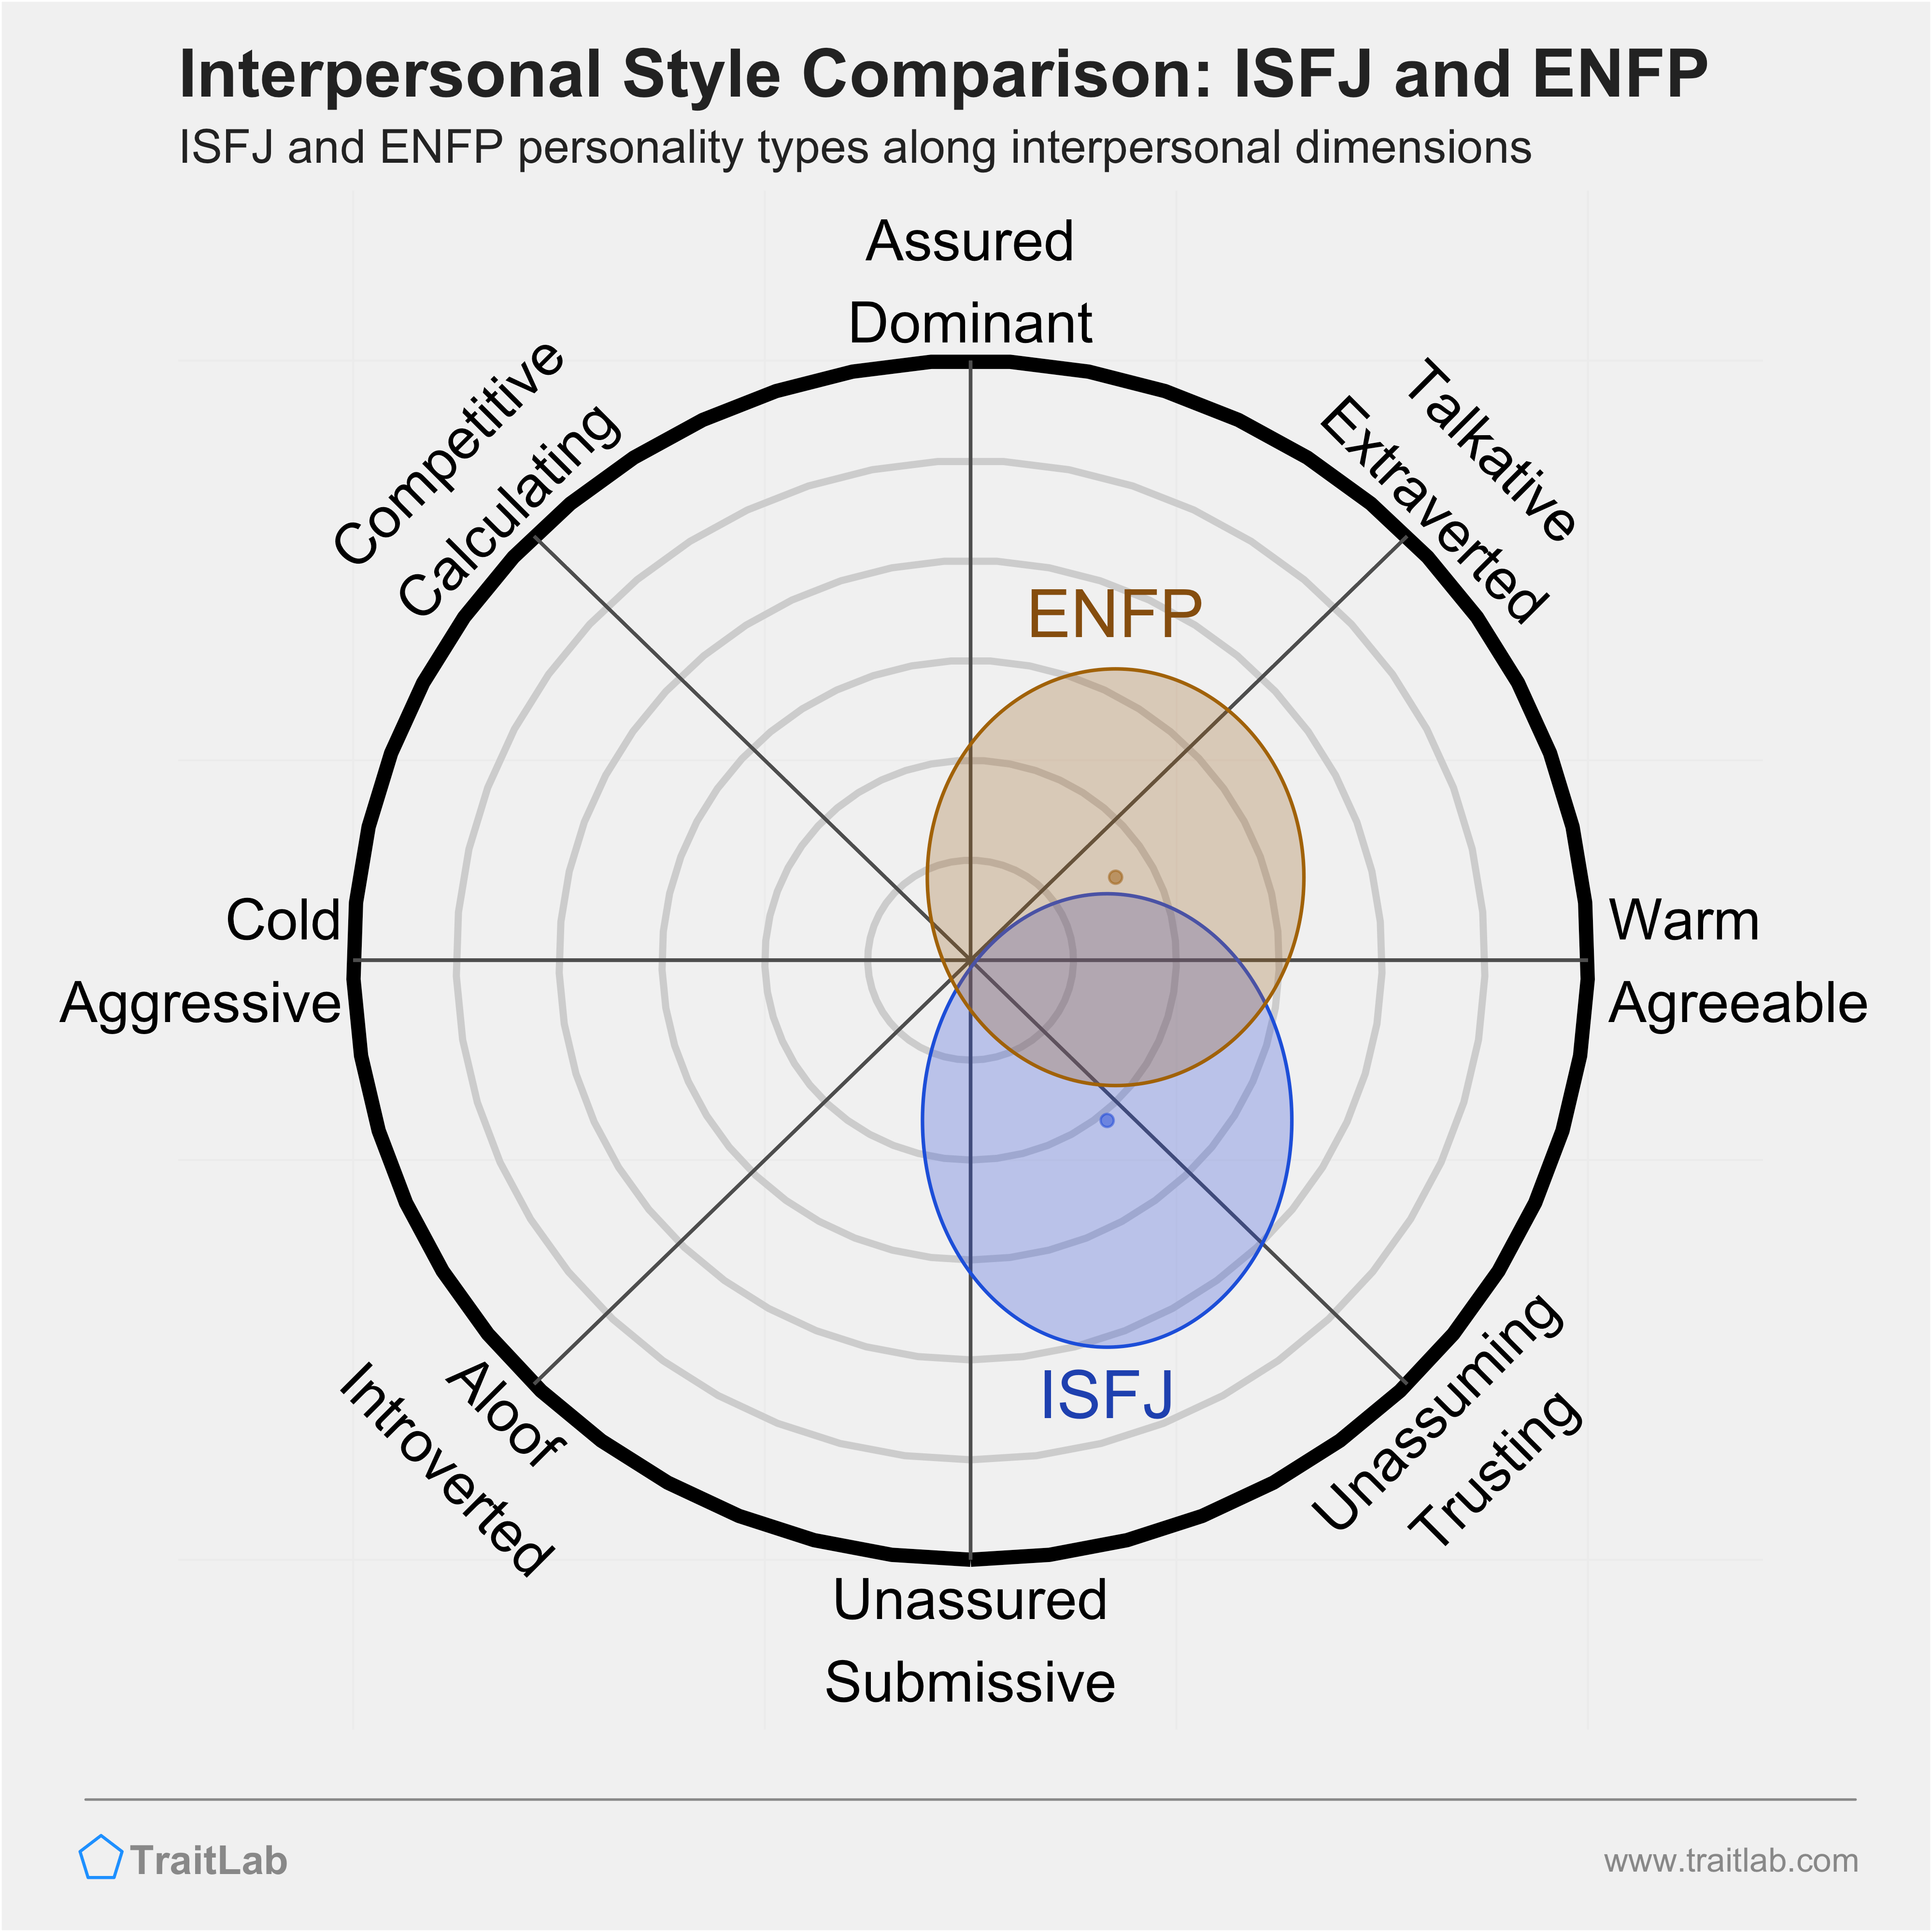 ISFJ and ENFP comparison across interpersonal dimensions